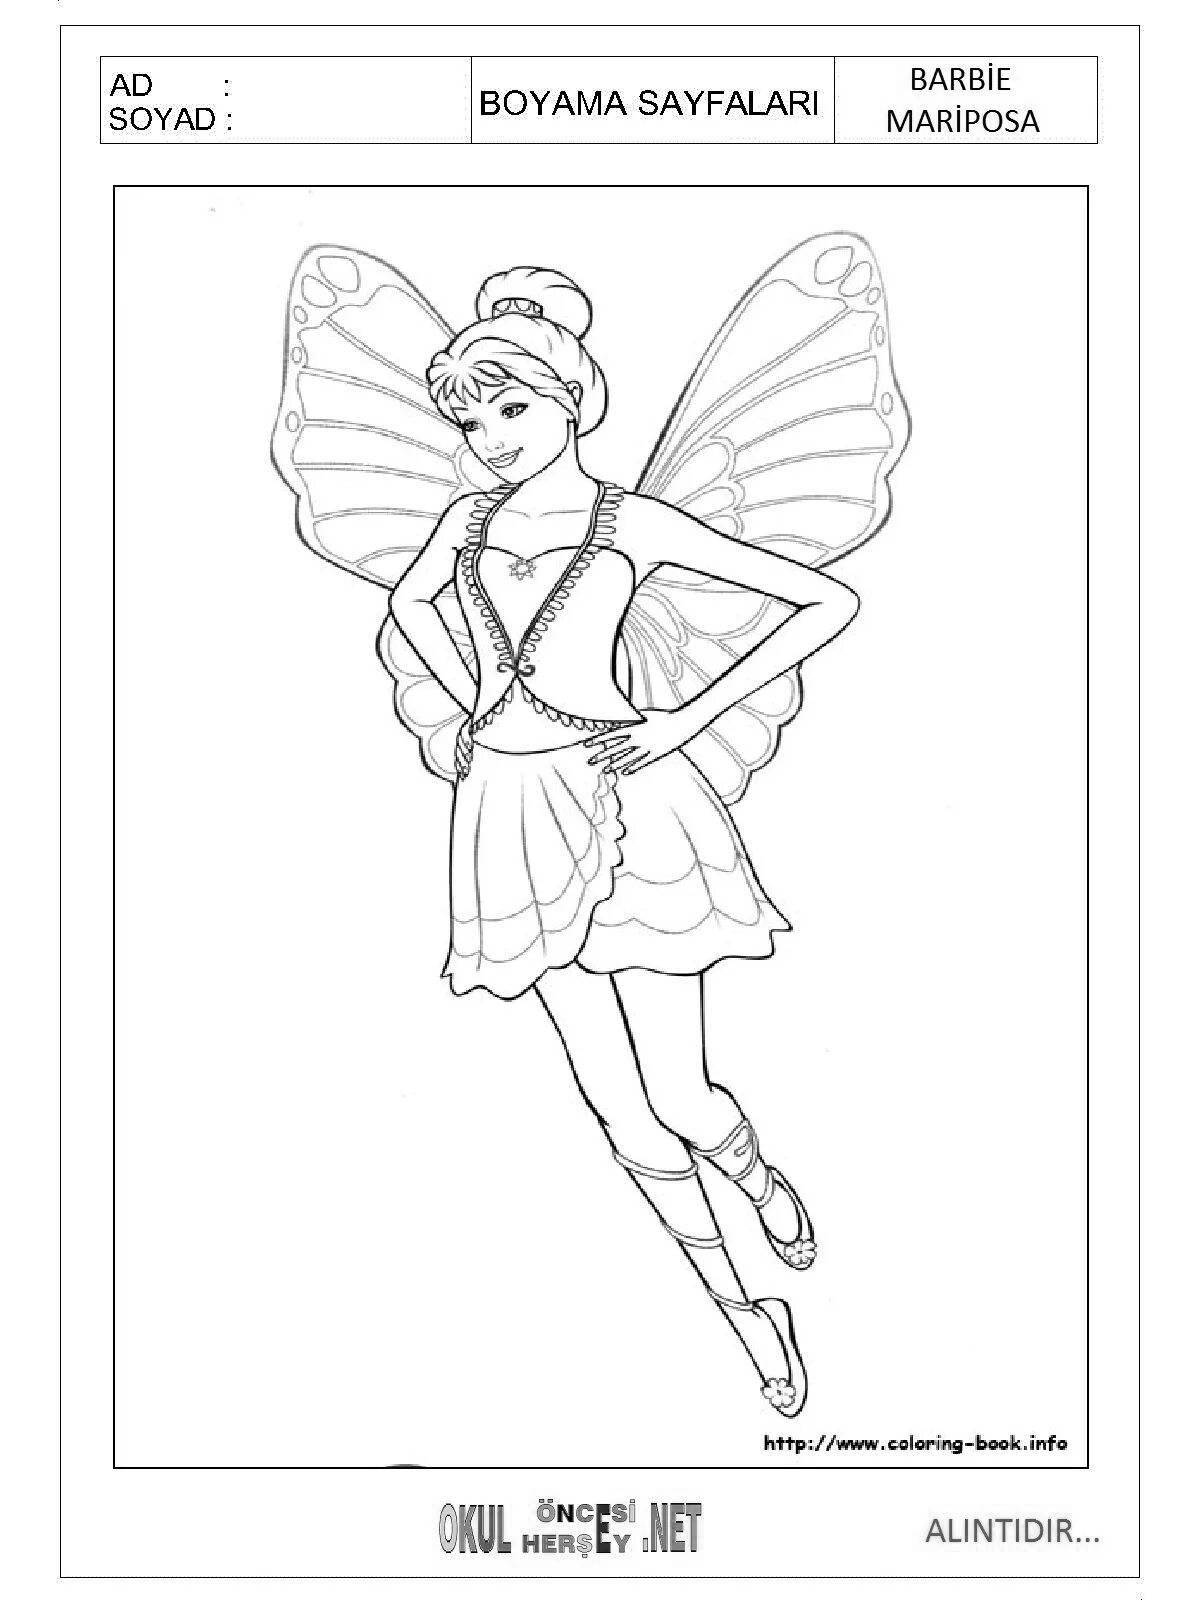 Coloring page glamor barbie with a projector